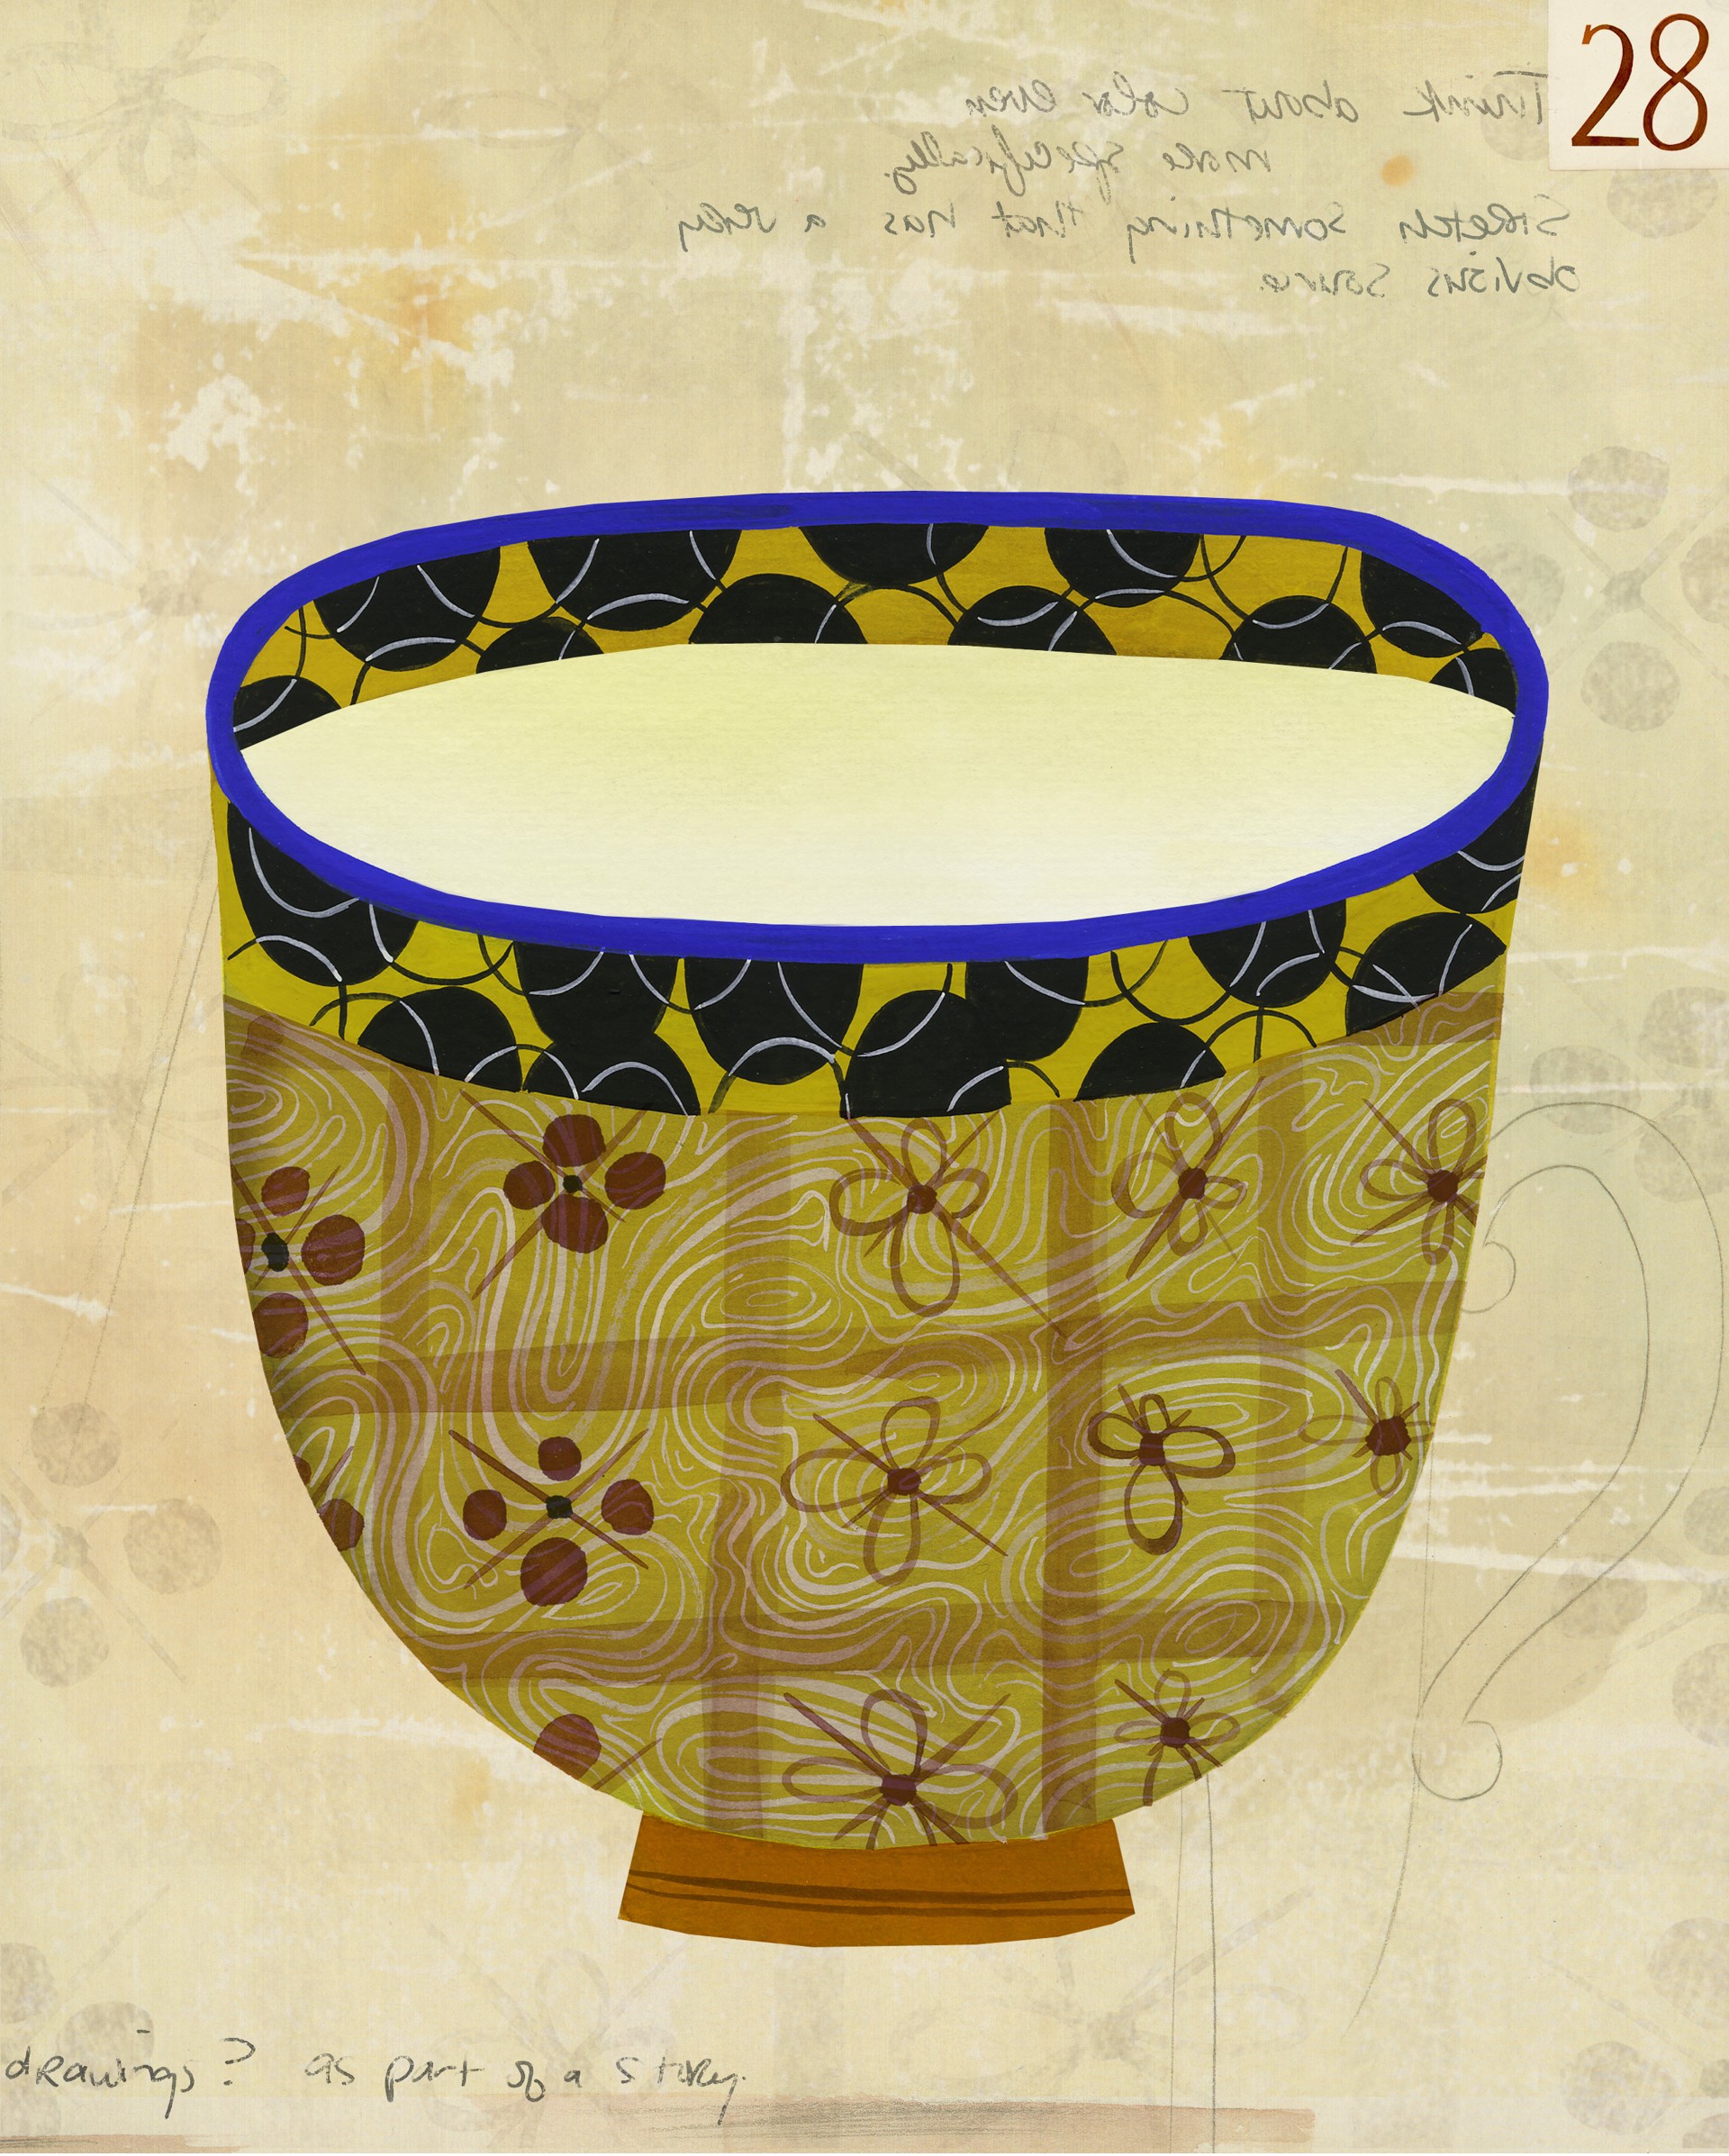 Cup No. 28 by Anne Smith